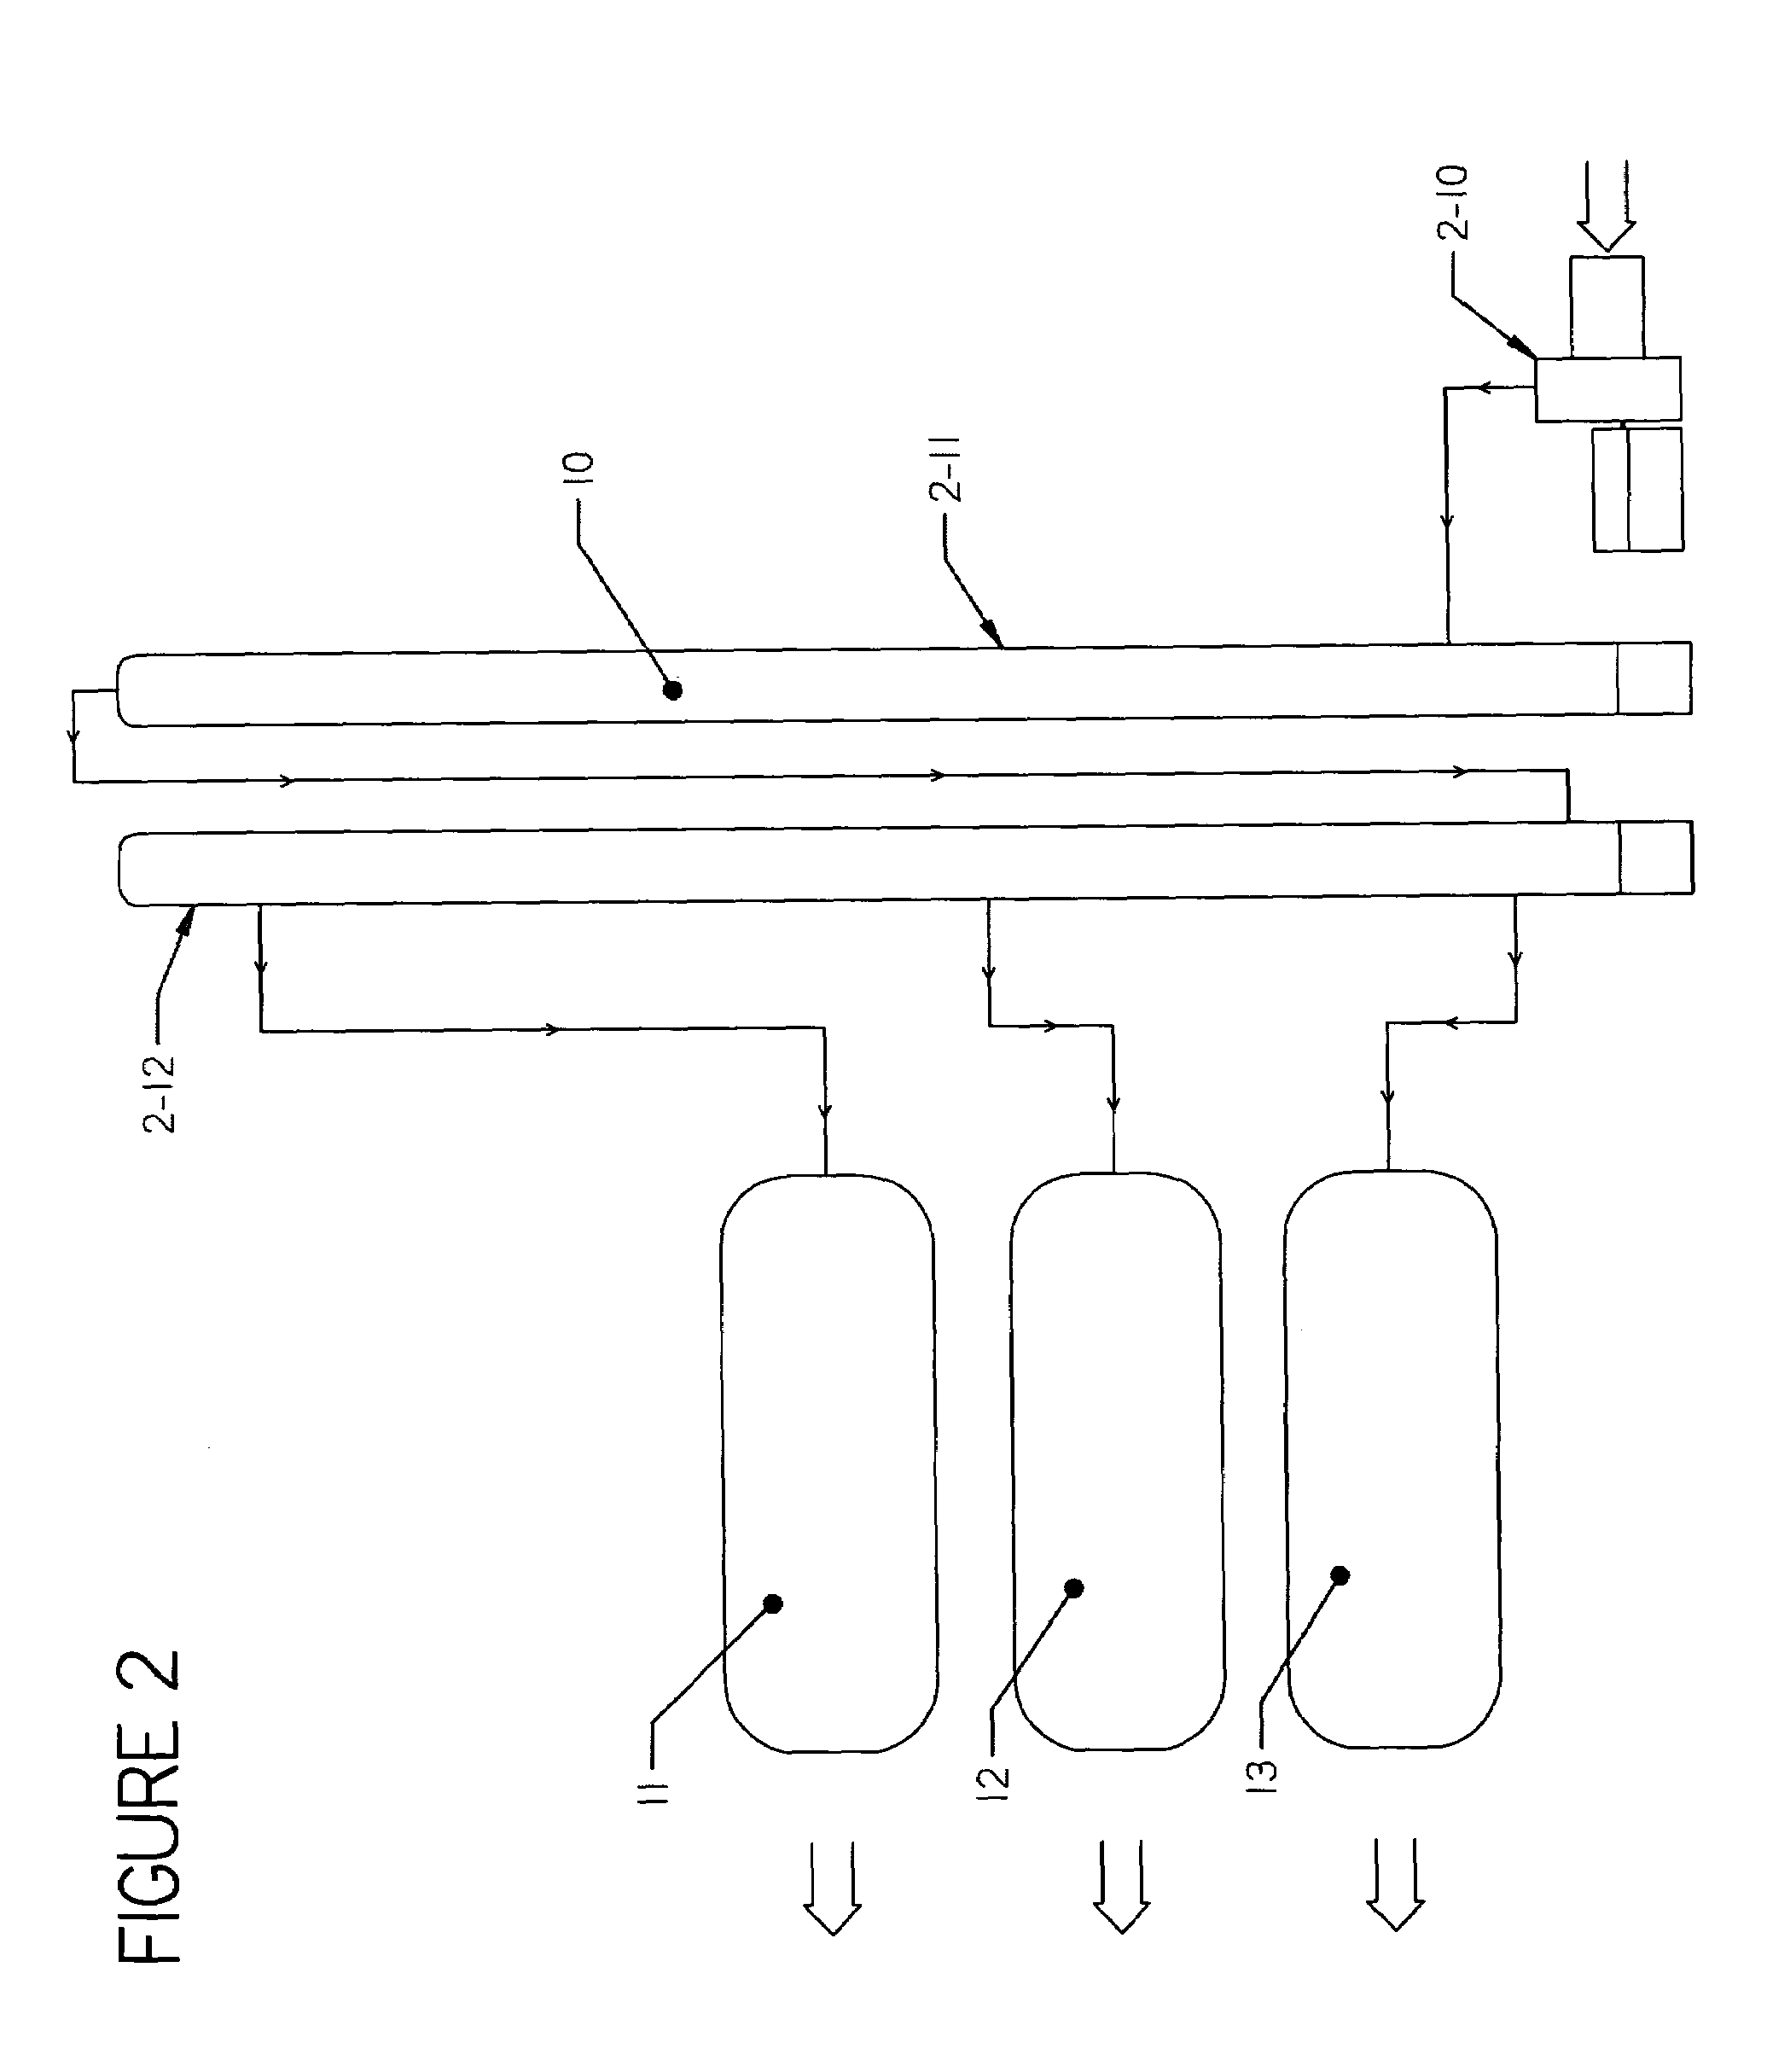 Oxygen-based biomass combustion system and method